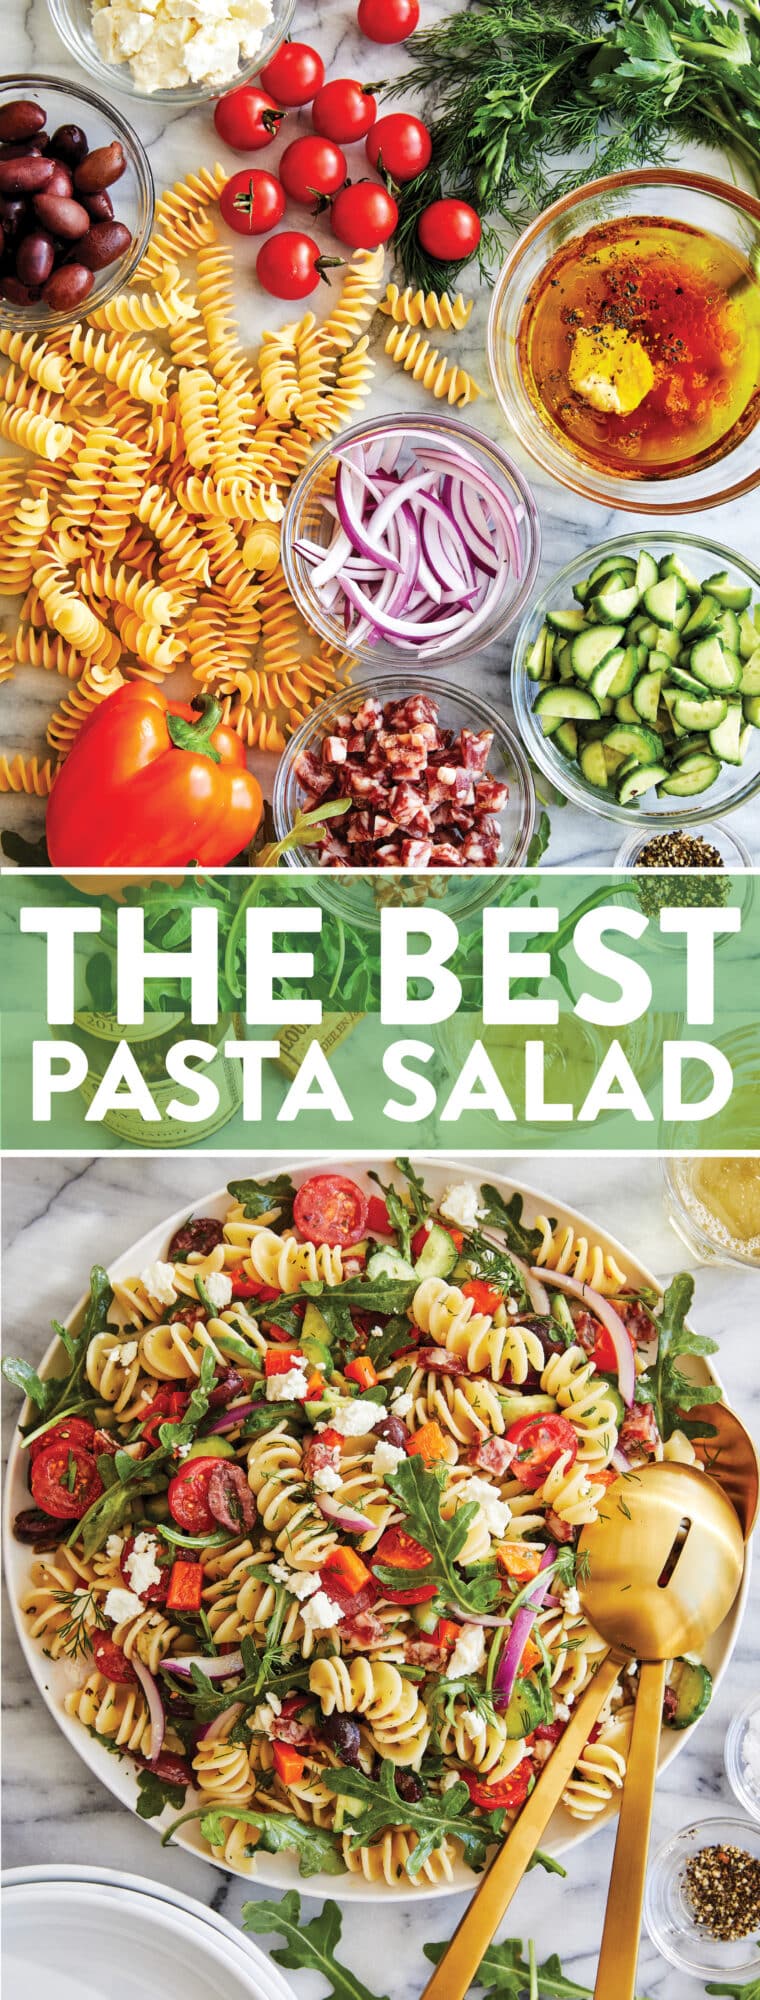 The Best Pasta Salad - The Only Recipe You Need Here!  So fresh, so zesty and sure to be a hit with EVERYONE at dinner, potlucks and picnics!